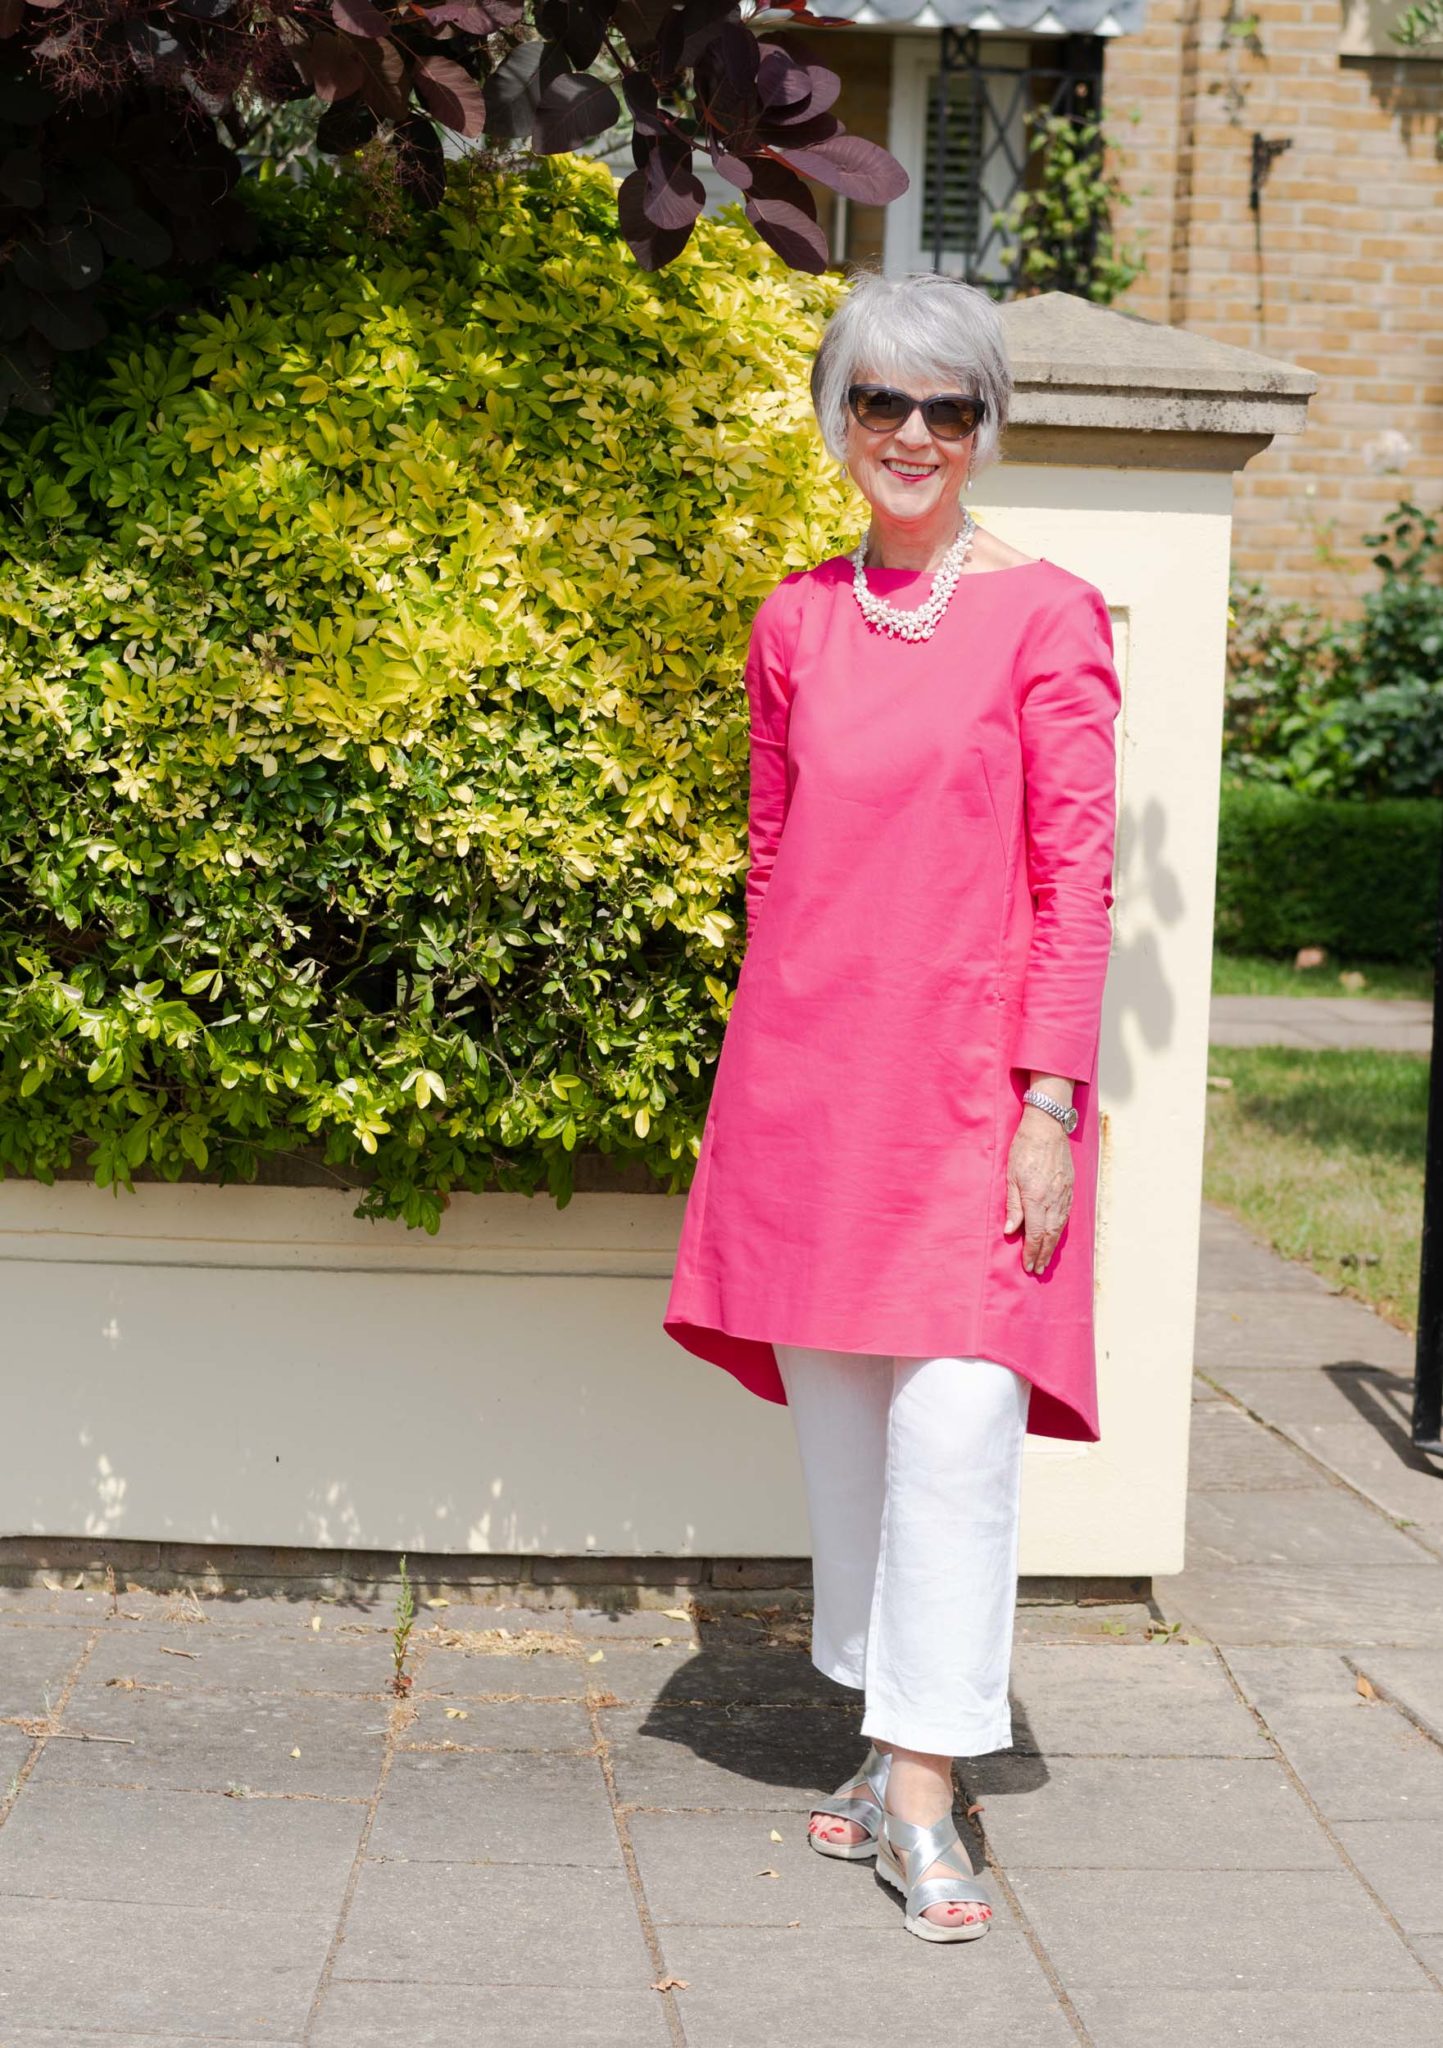 Tunic dress and trouser combination - Chic at any age